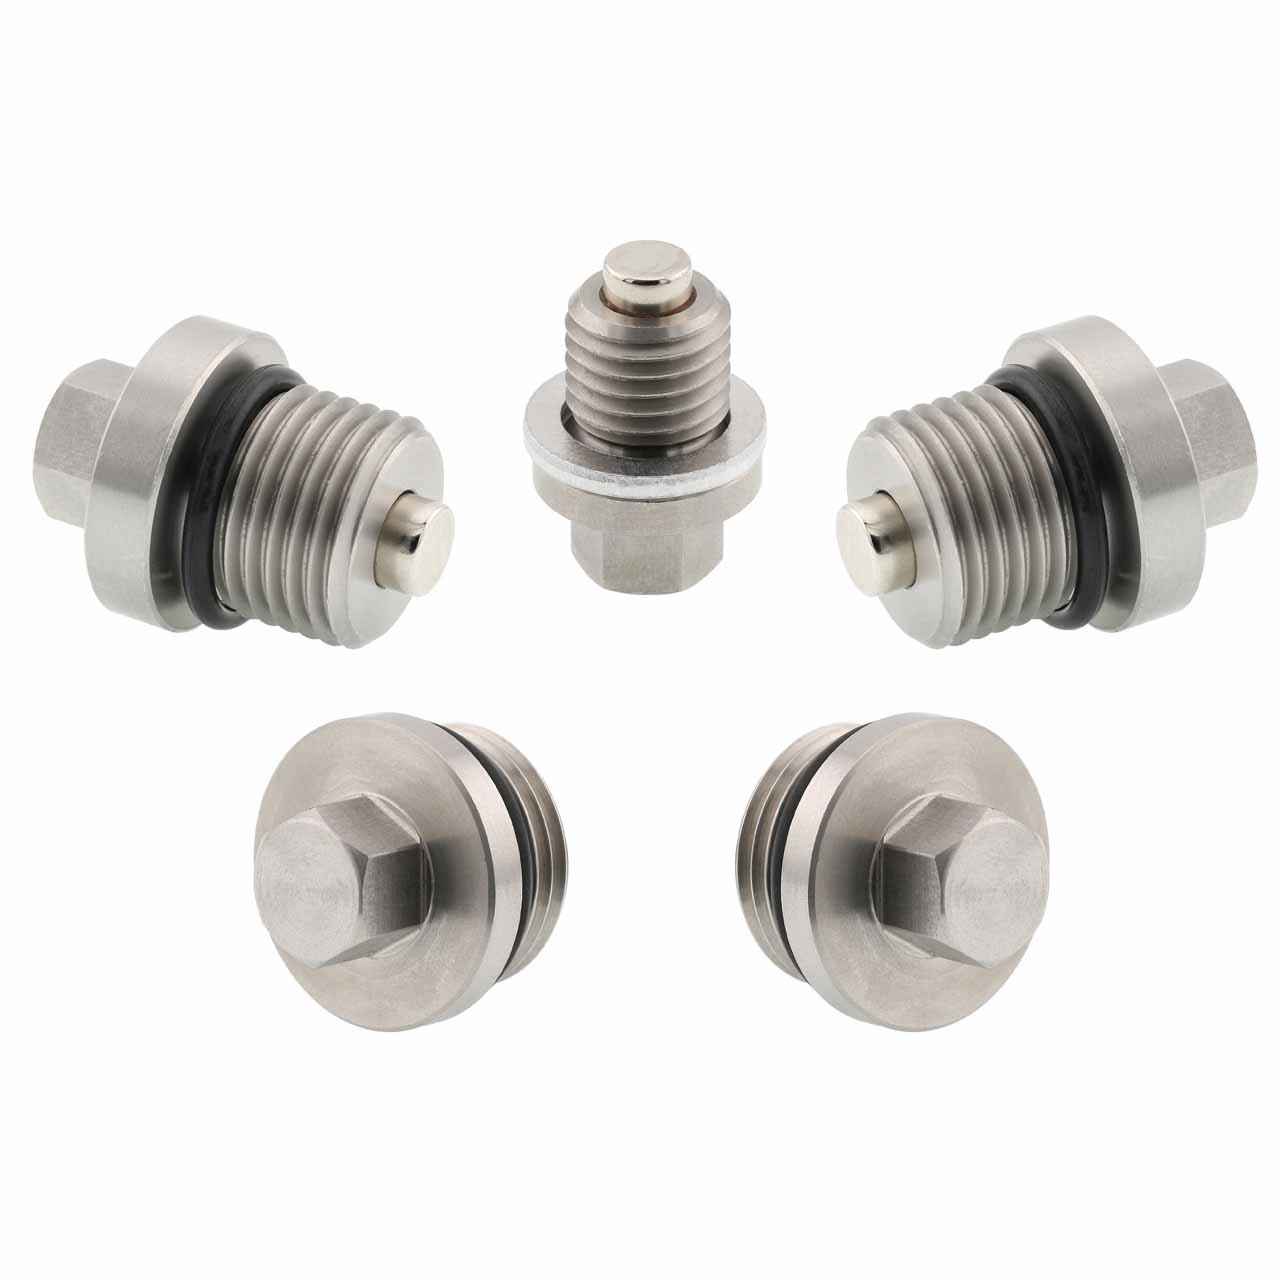 Polaris RZR XP 1000 High Lifter Magnetic Oil Drain Plug Kit - 2020-2022 - Engine, Transmission, Differential - Made In USA